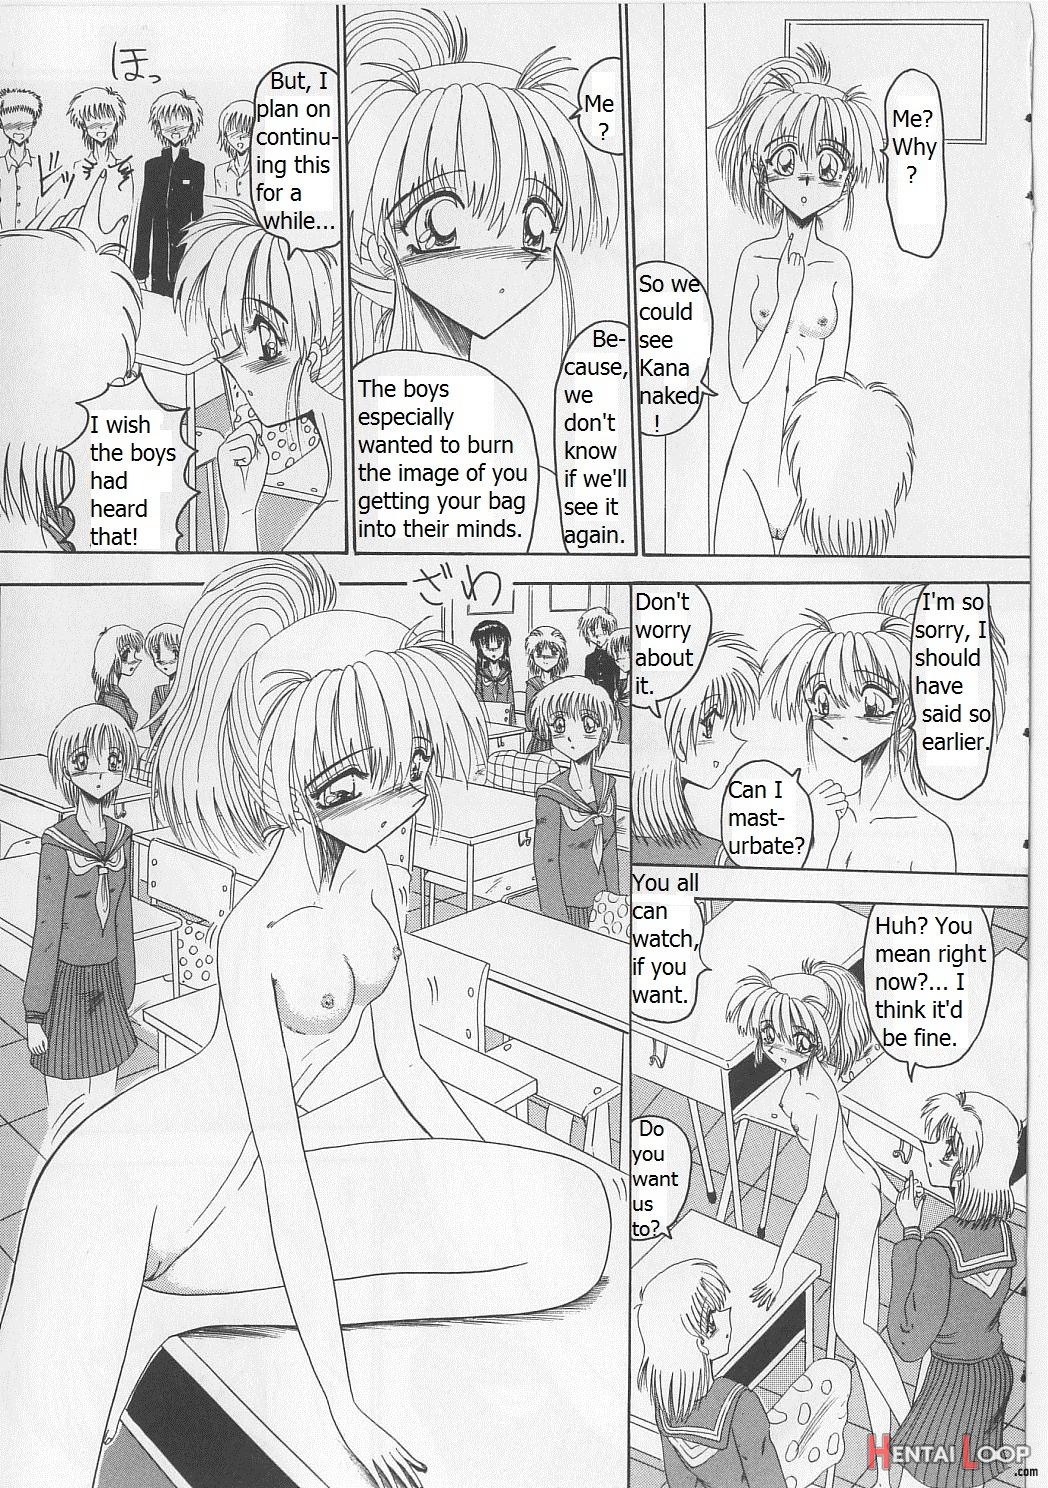 An Exhaustive Report On Masochistic Girls Ch 1 - 3 page 20